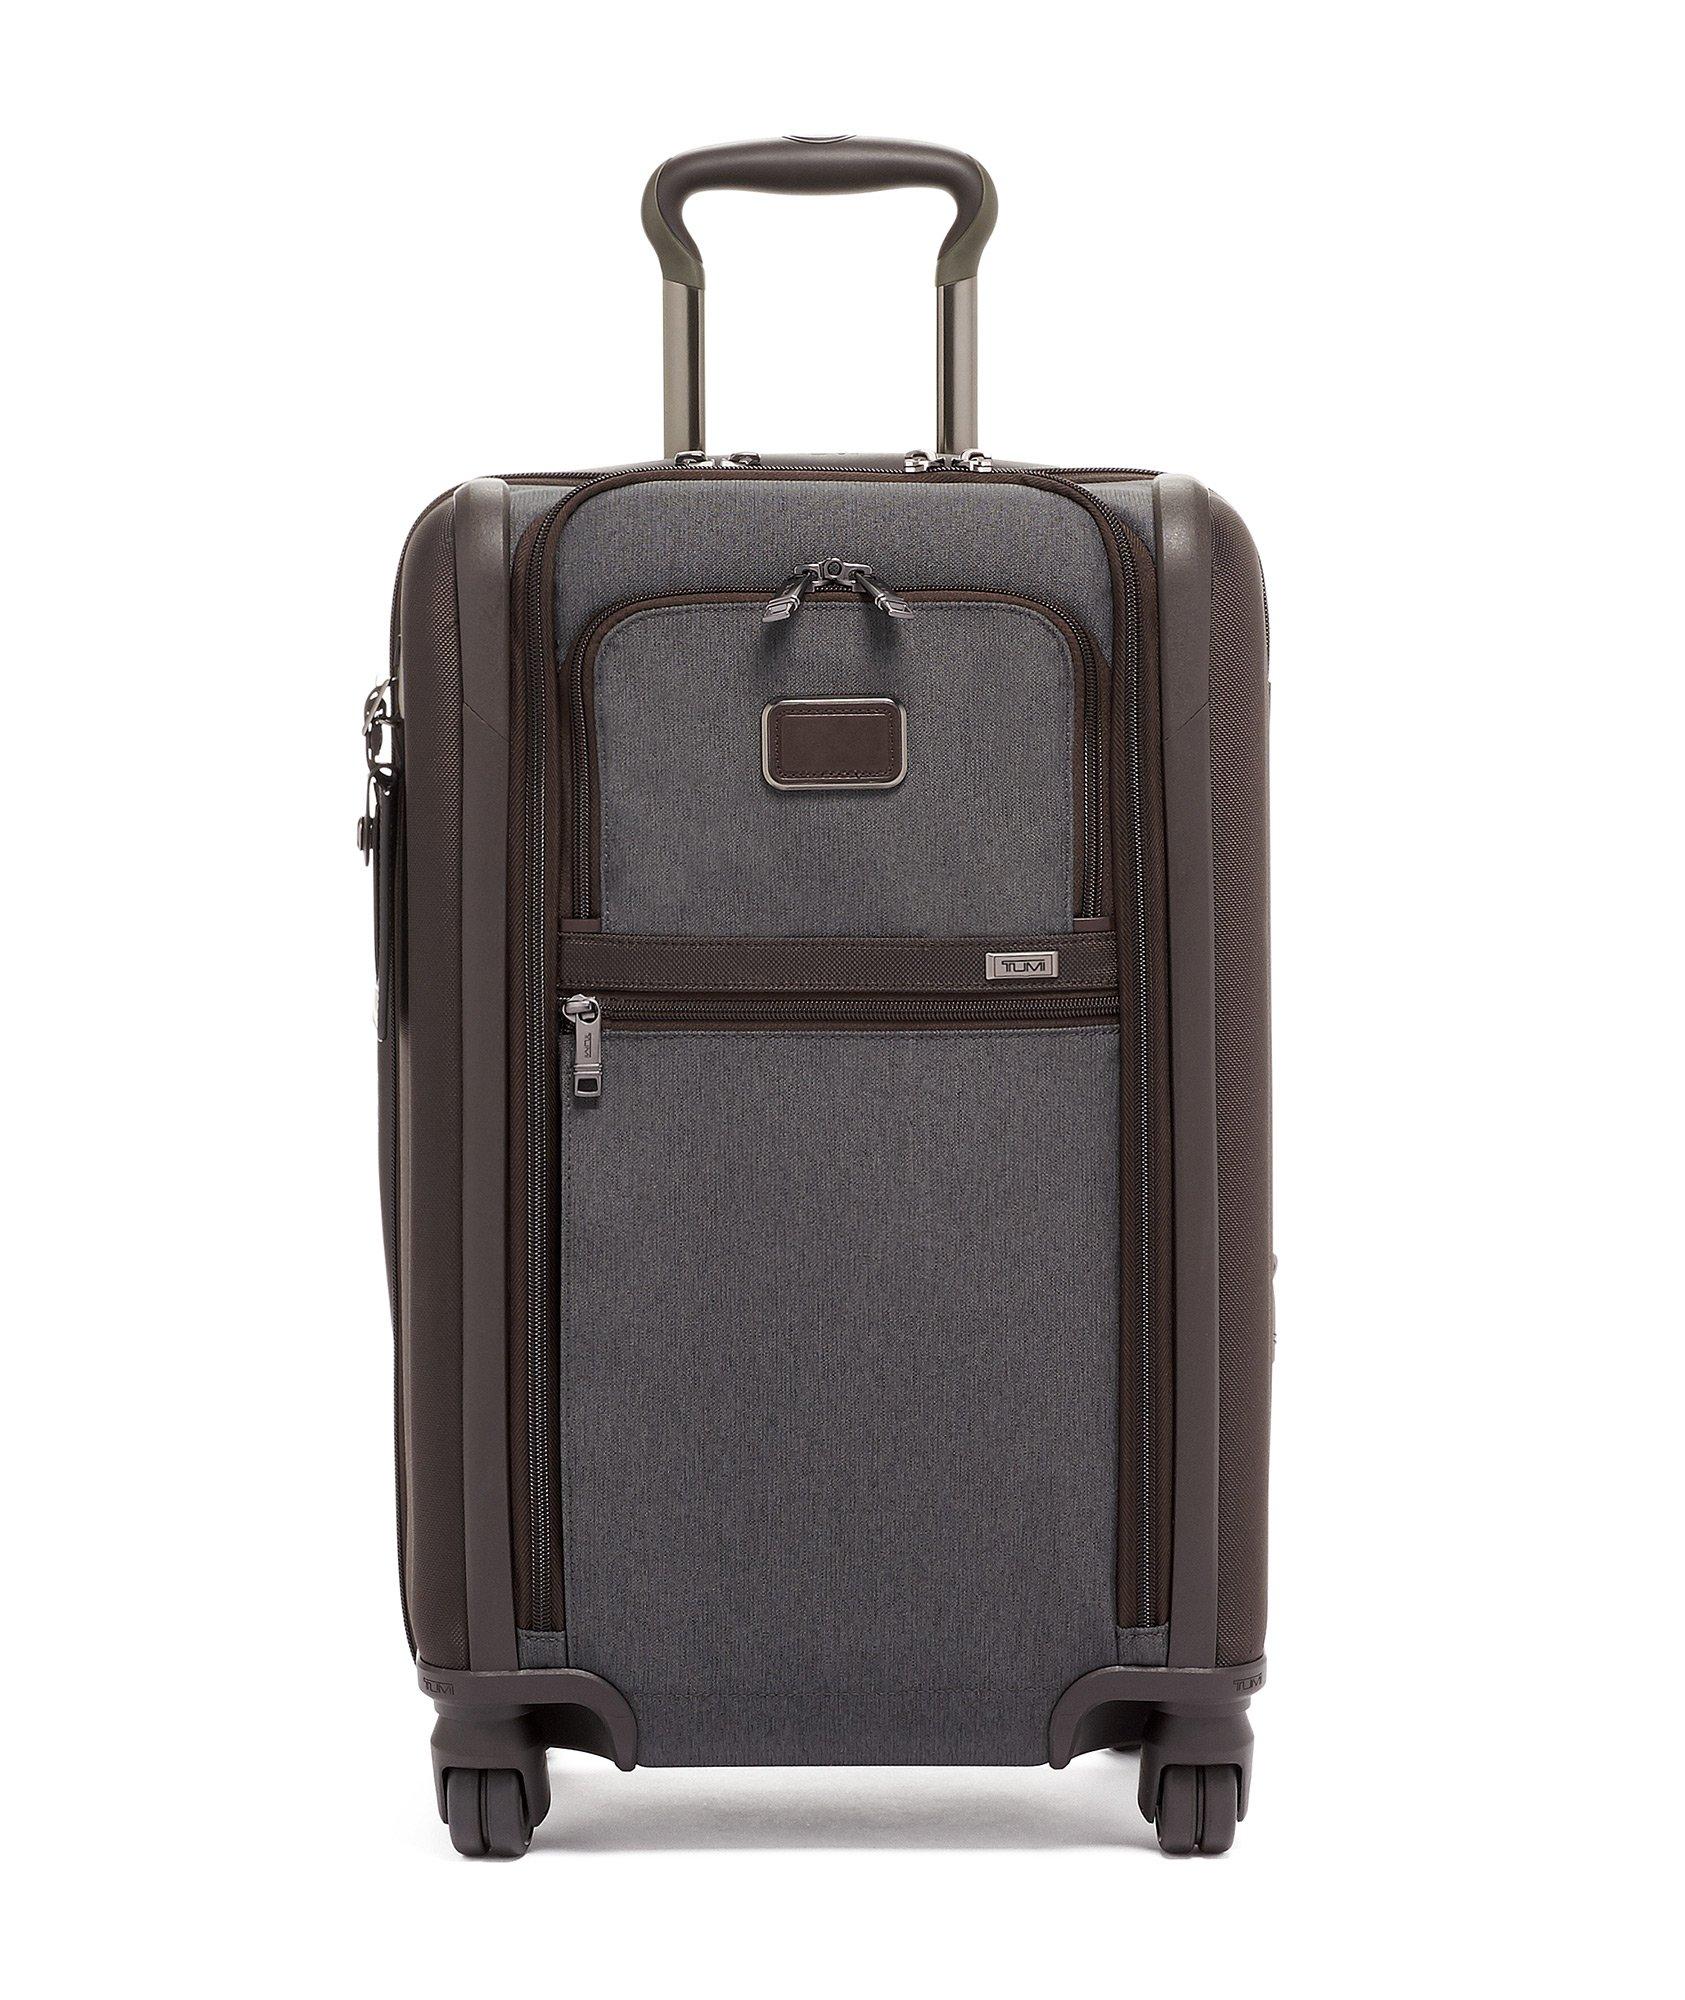 International Dual Access Carry-On image 0